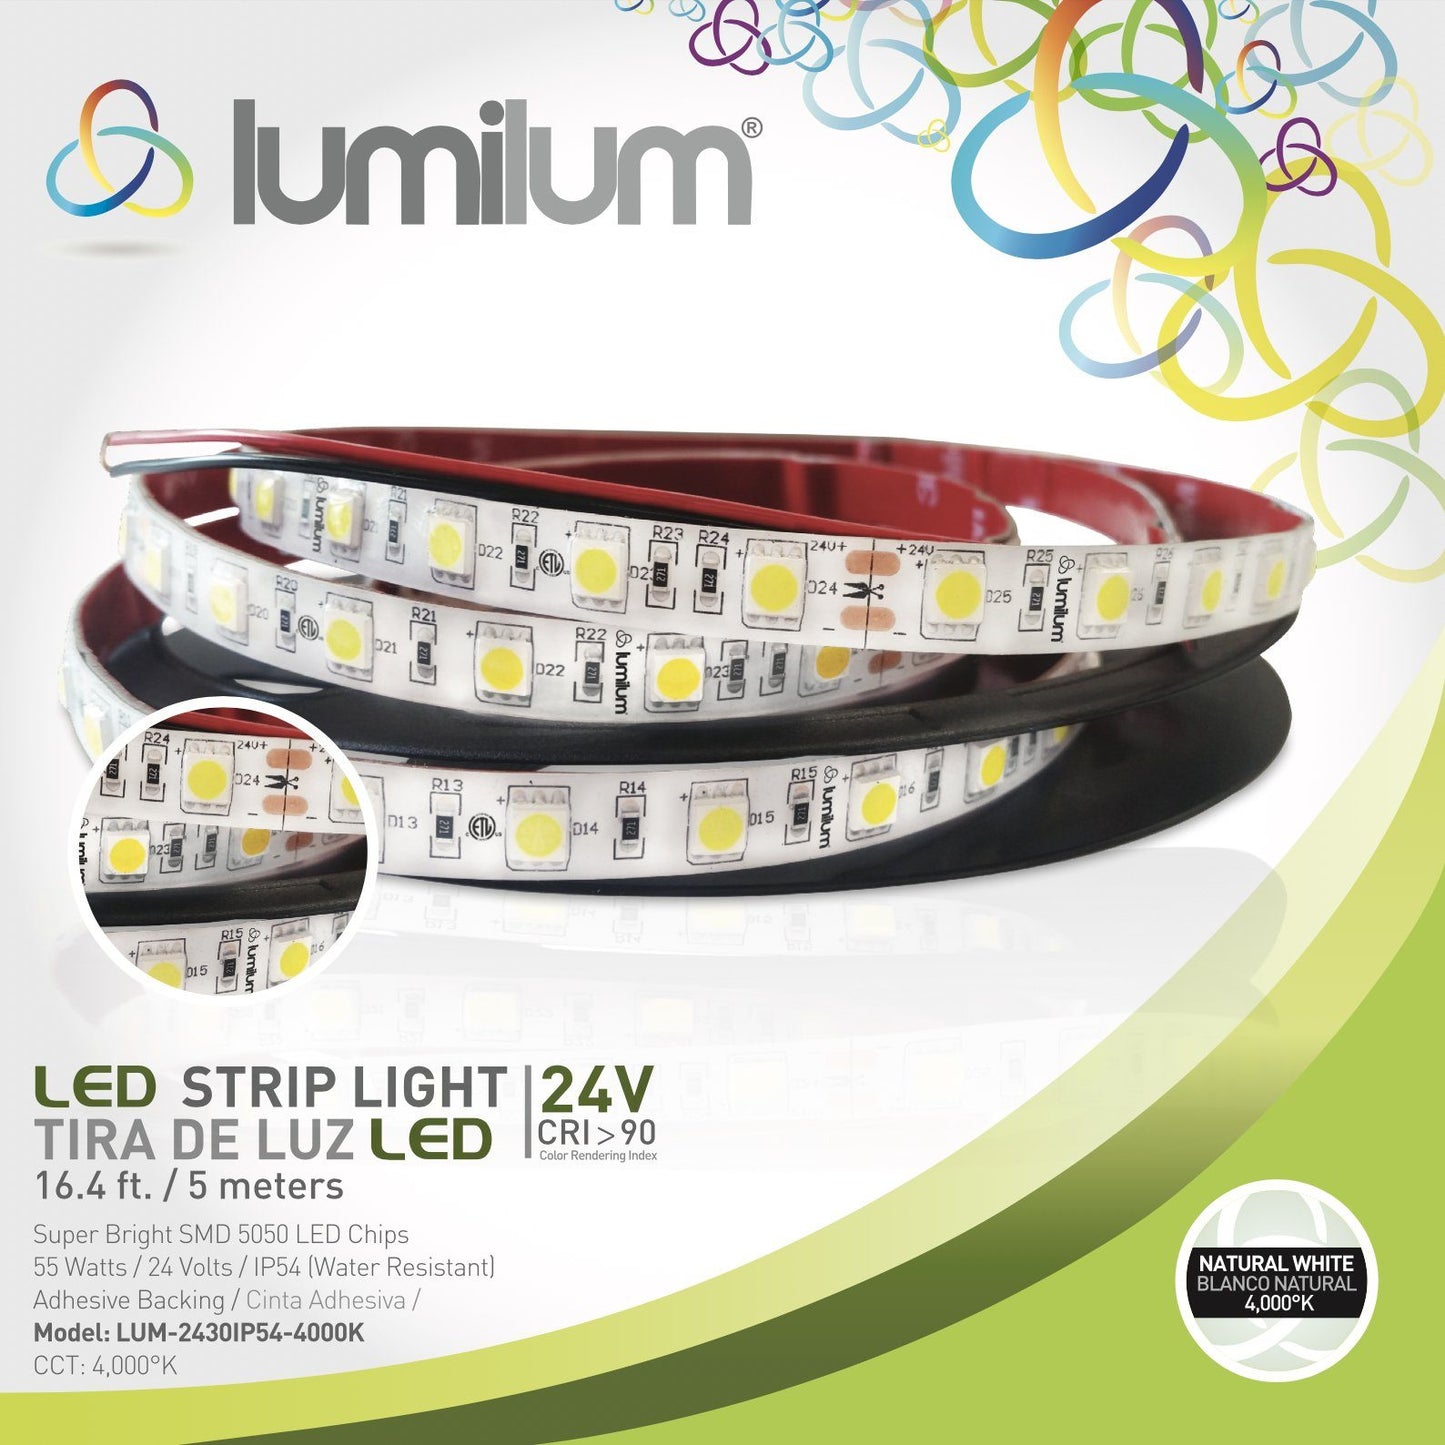 lumilum brand lime green led strip light packaging with strip light image and 4000k product information text